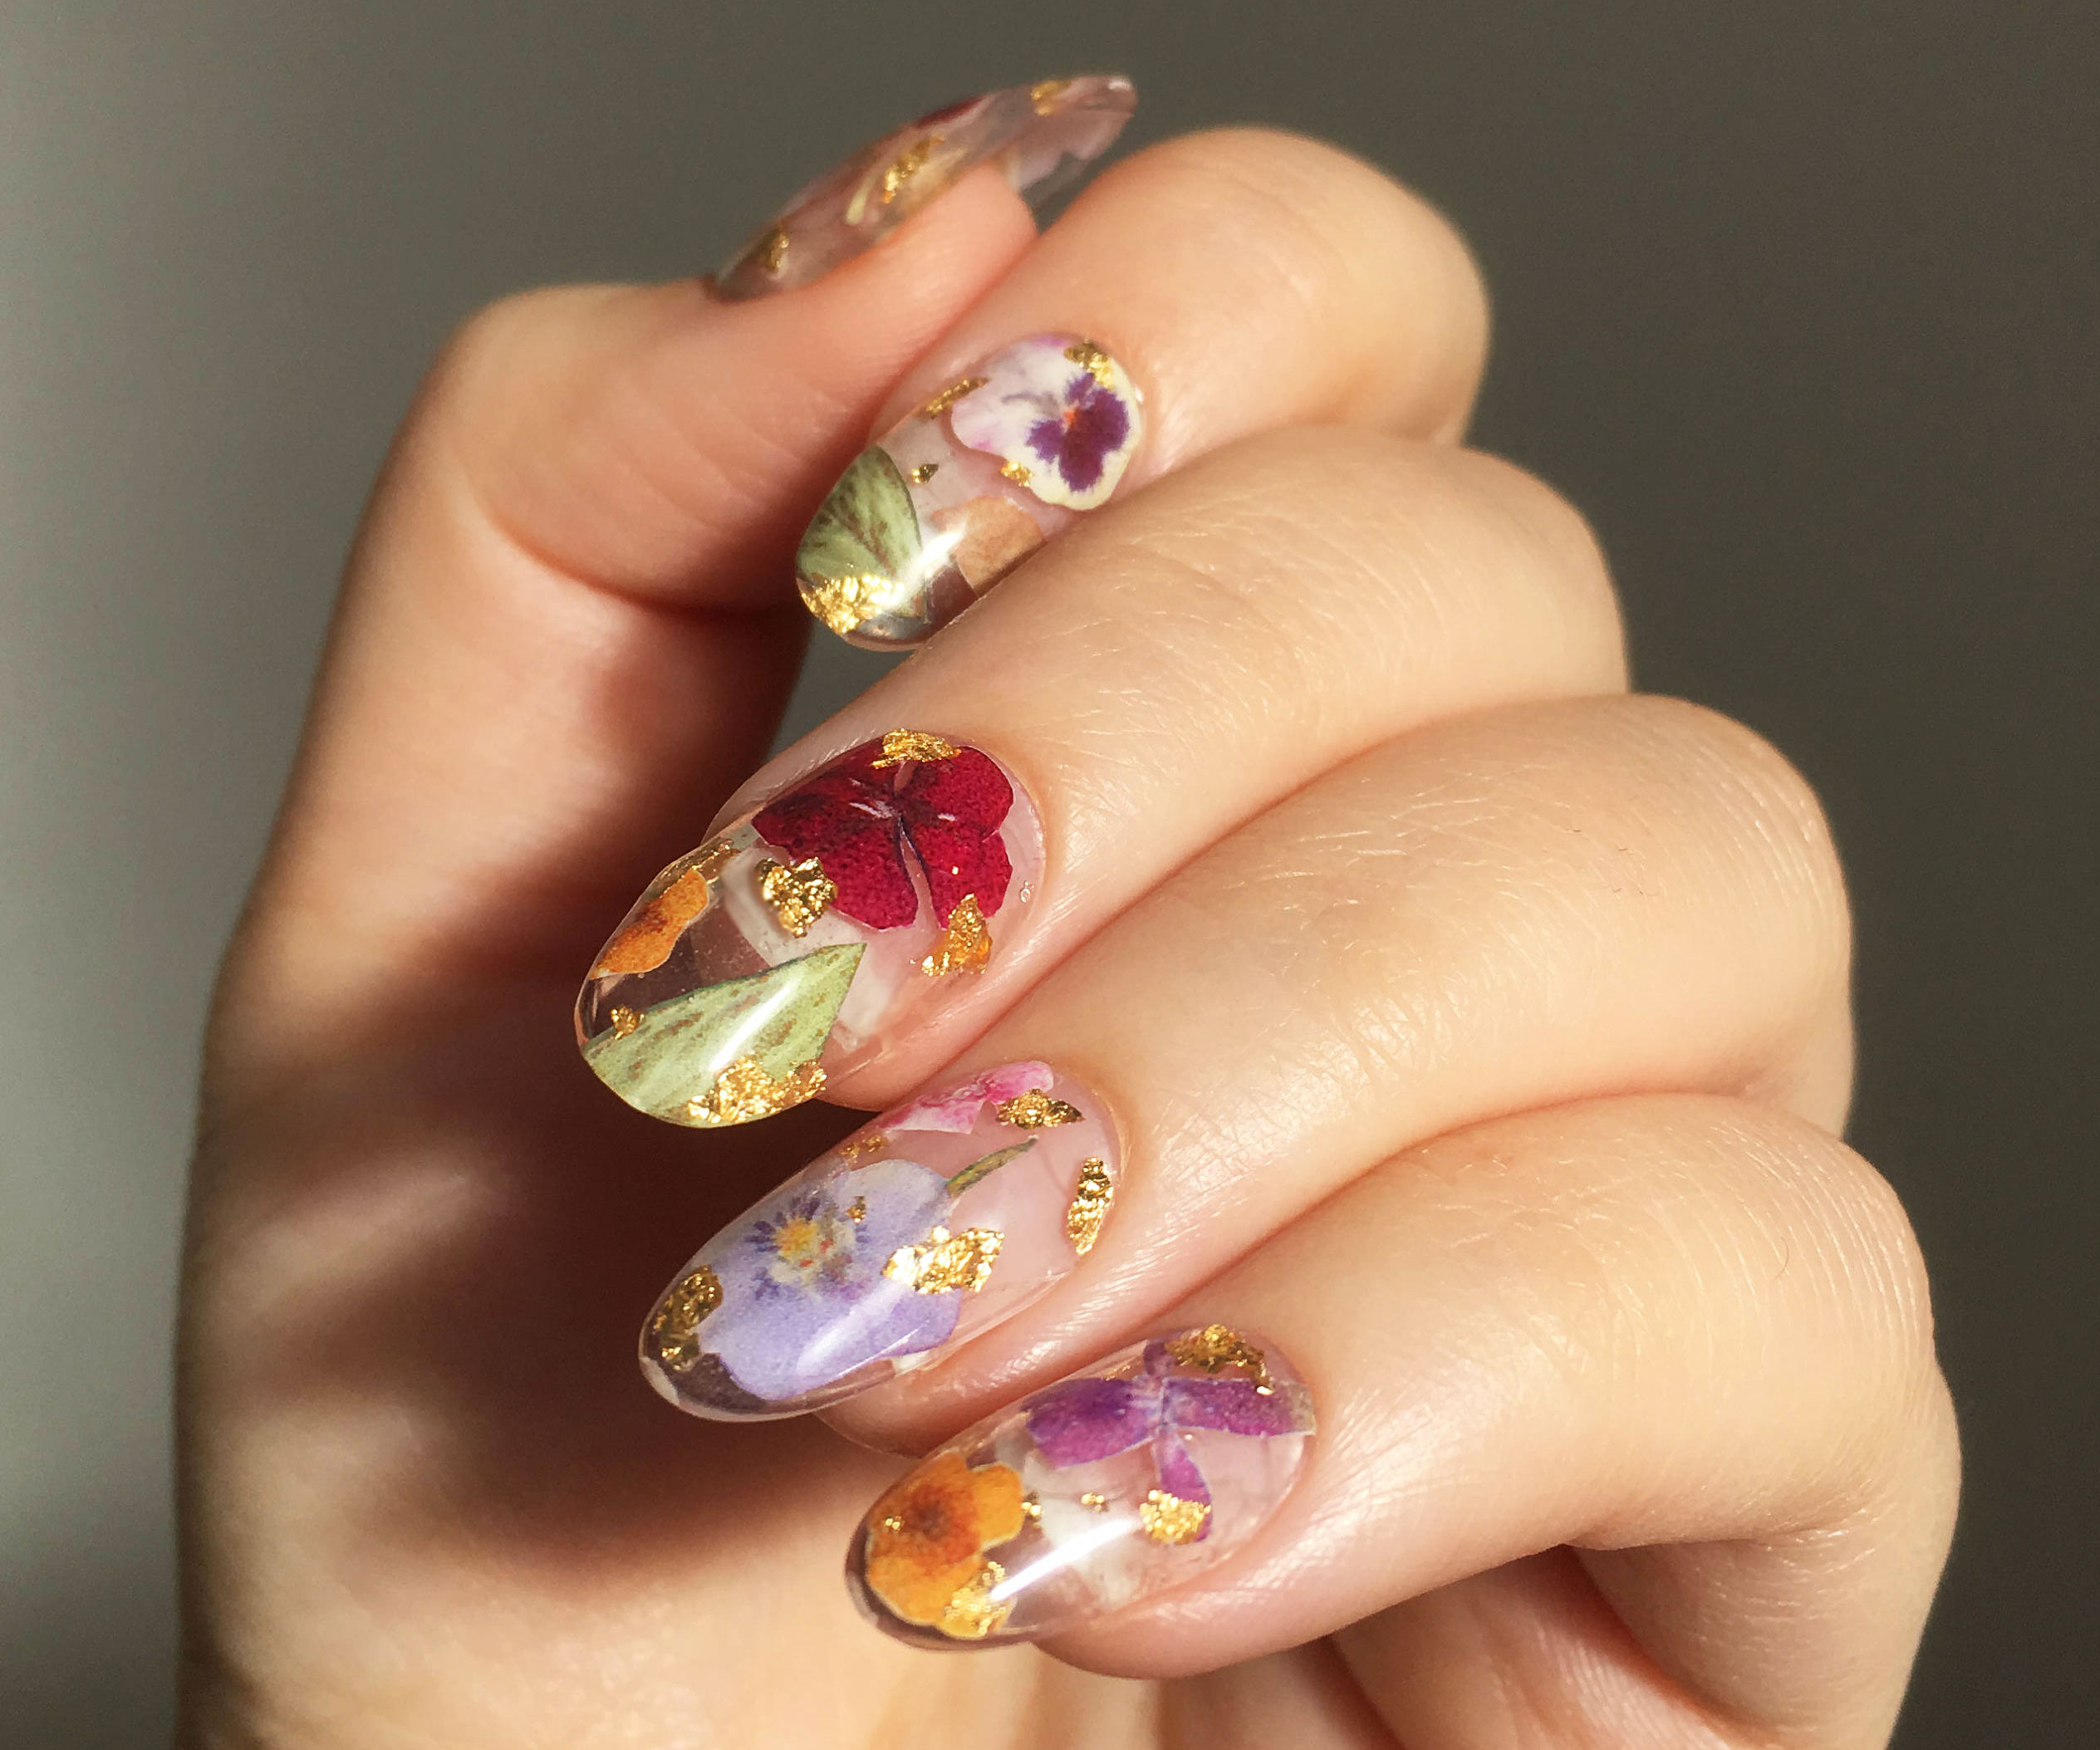 Dried Flowers Press On Nails 1